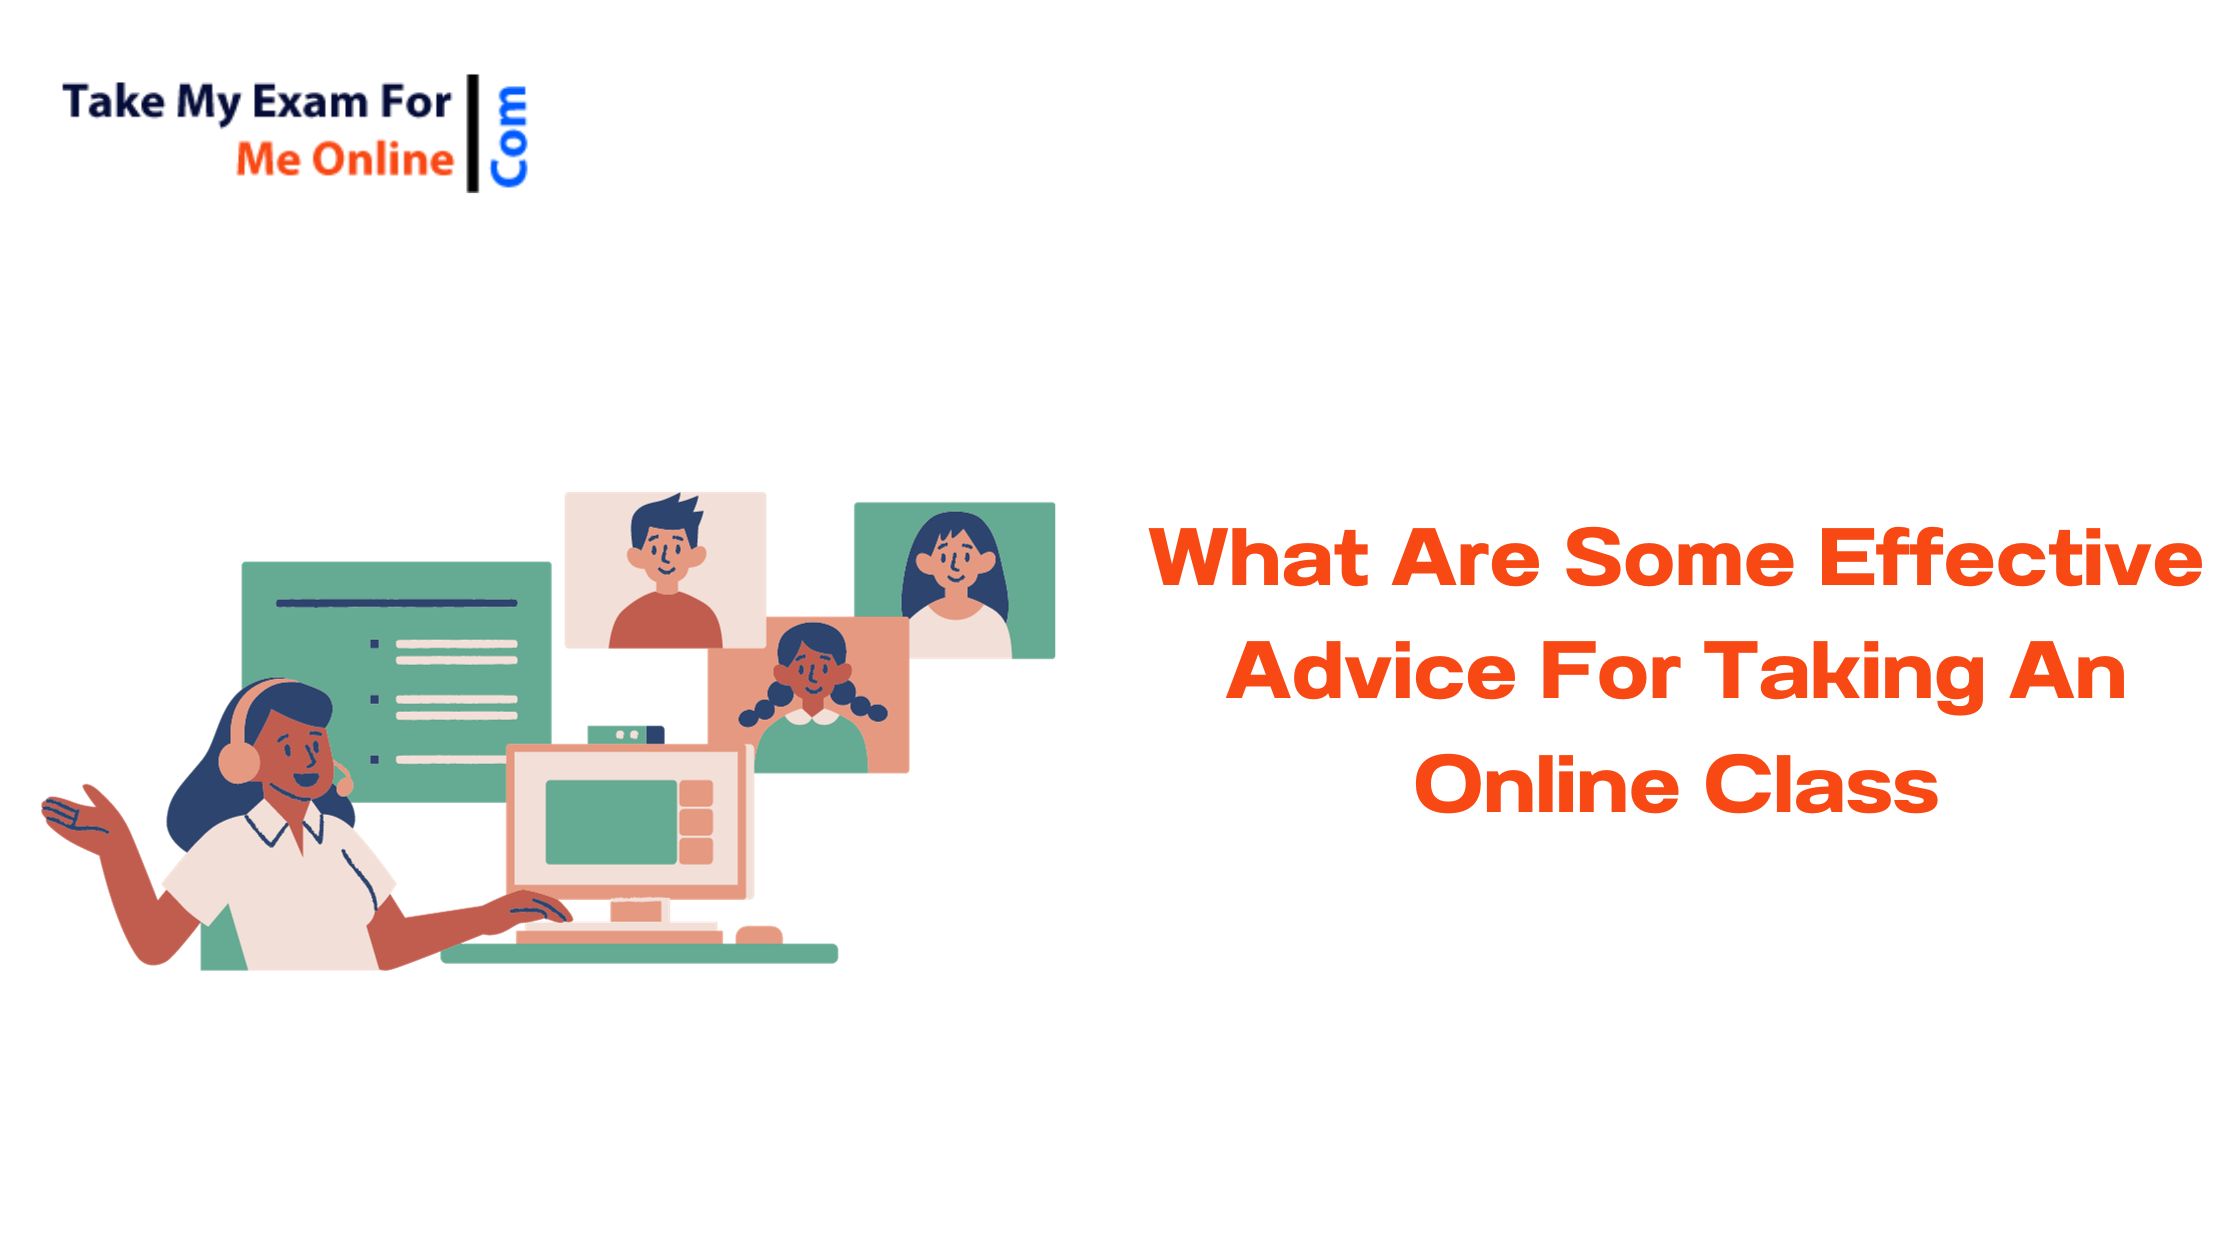 What Are Some Effective Advice For Taking An Online Class